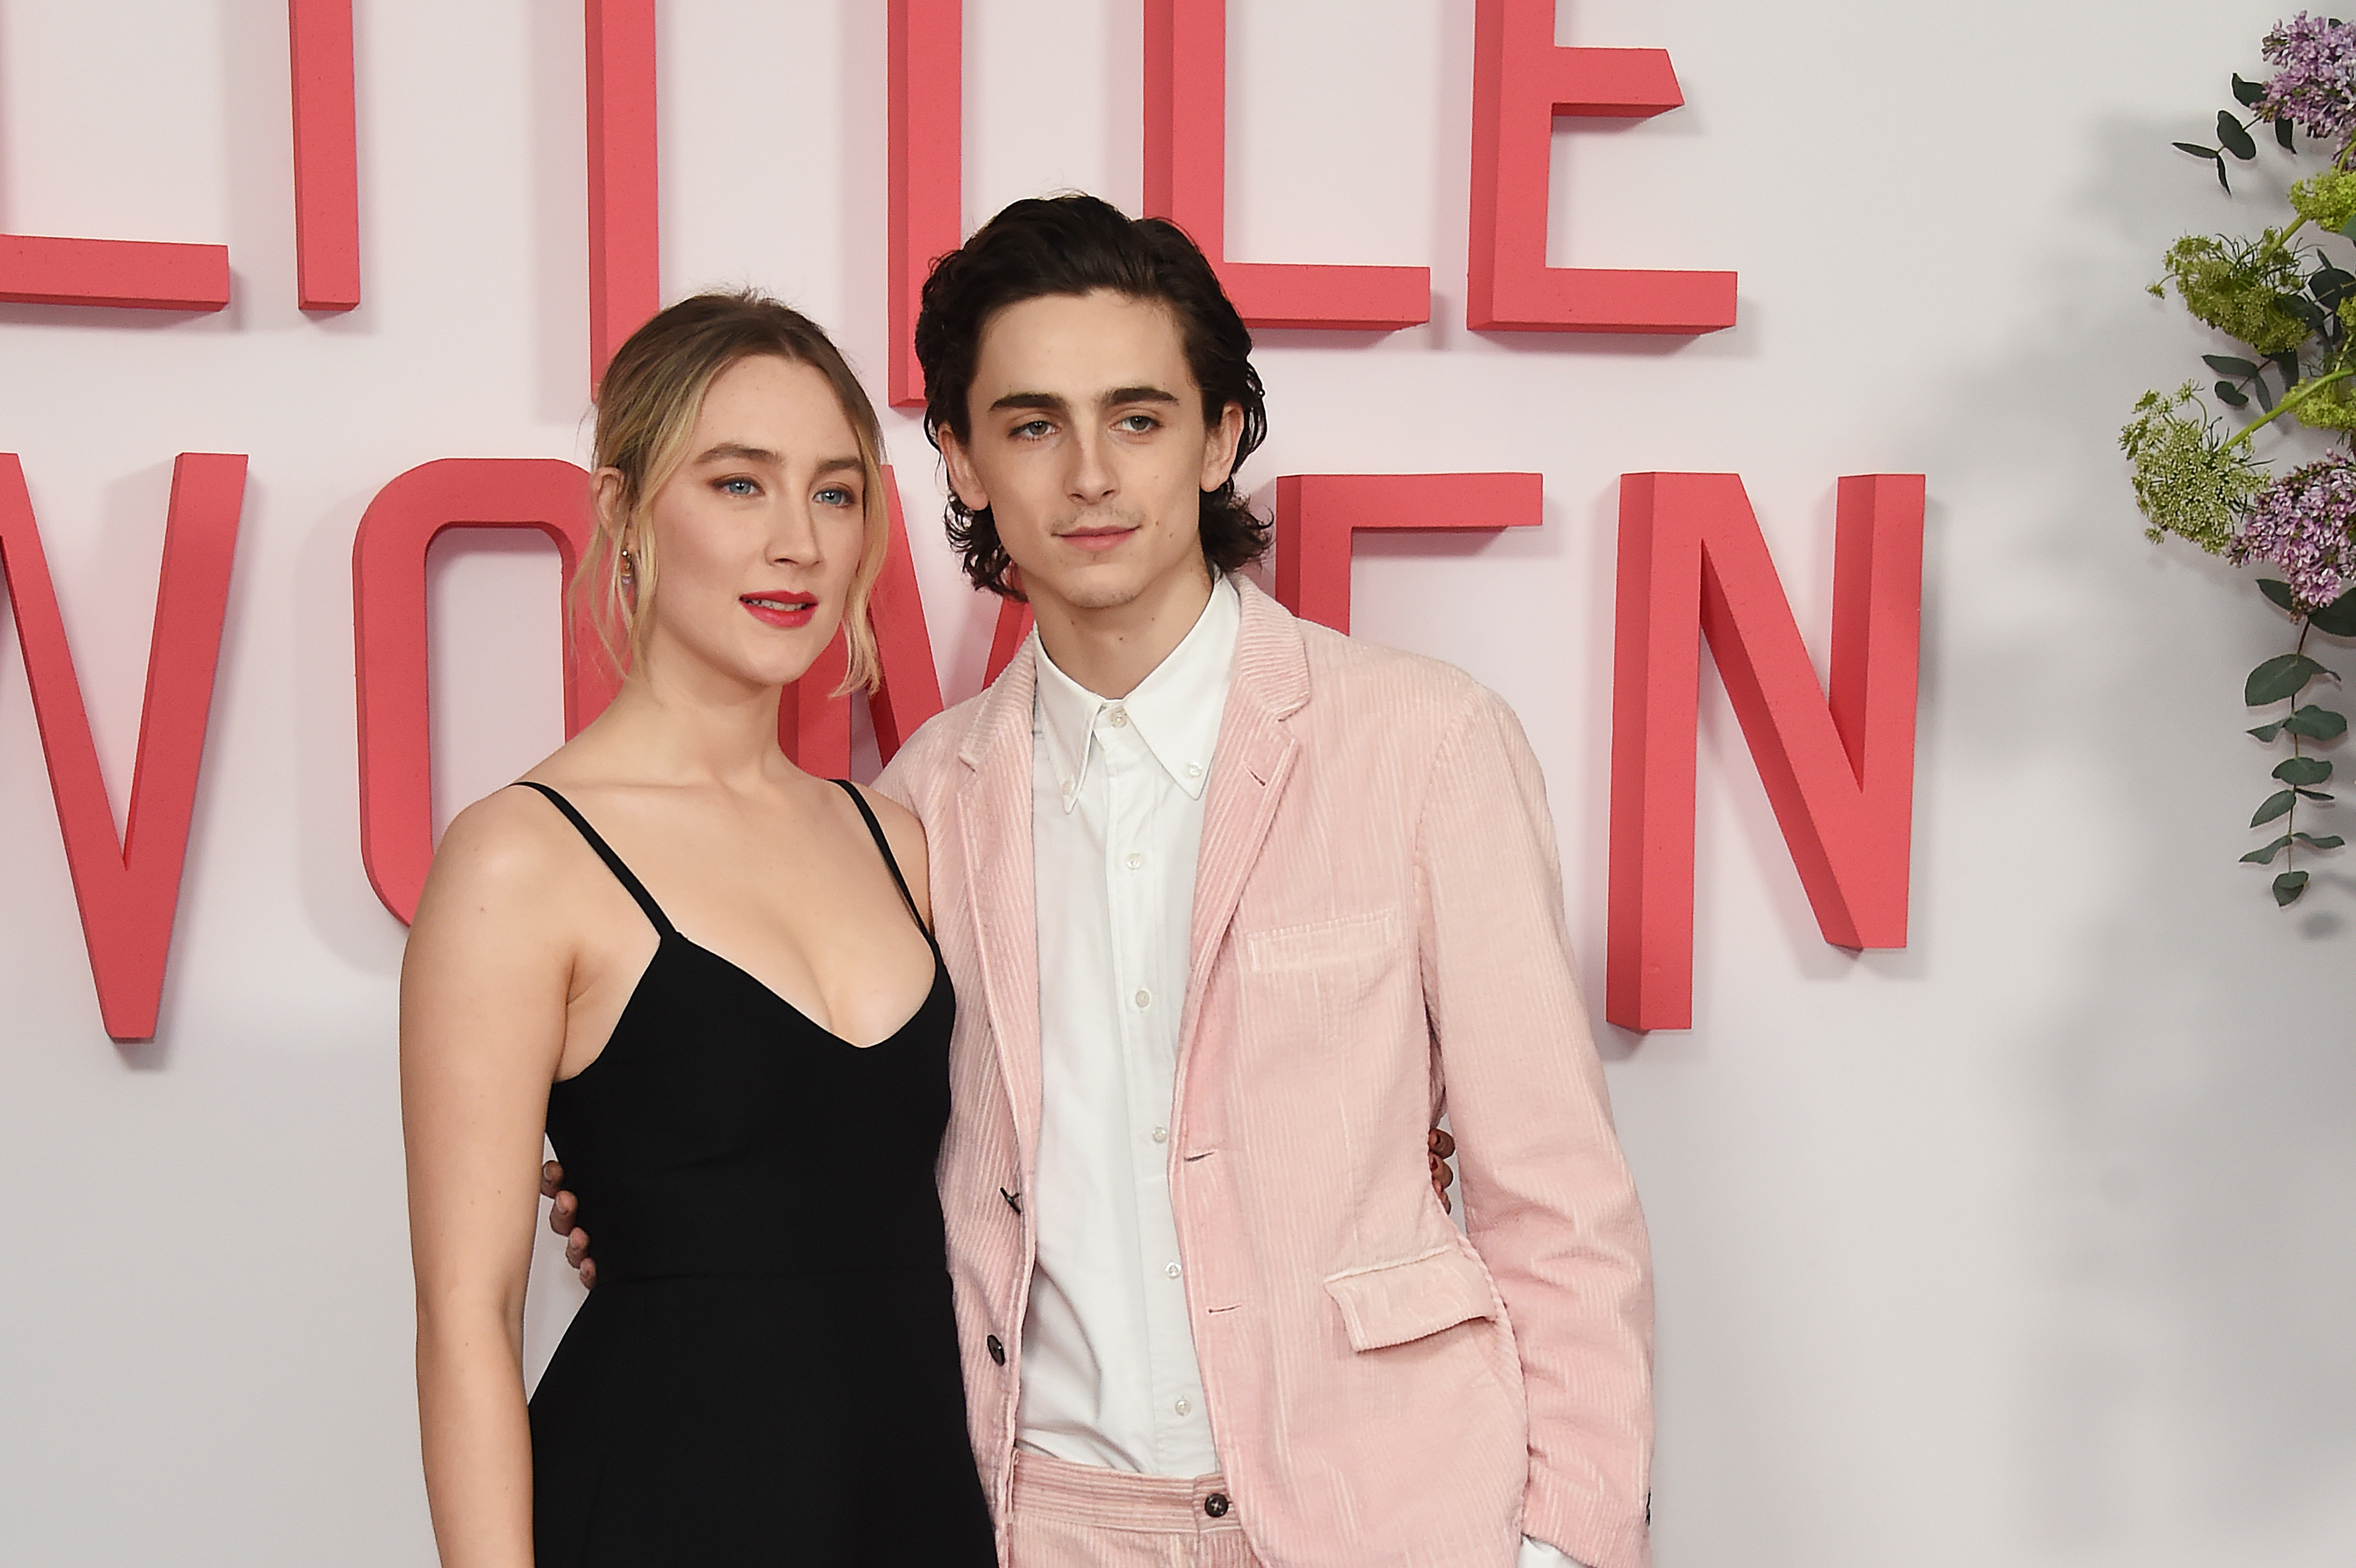 Saiorse and Timothée at the &quot;Little Women&quot; premiere, she in a black dress and he in a pink suit